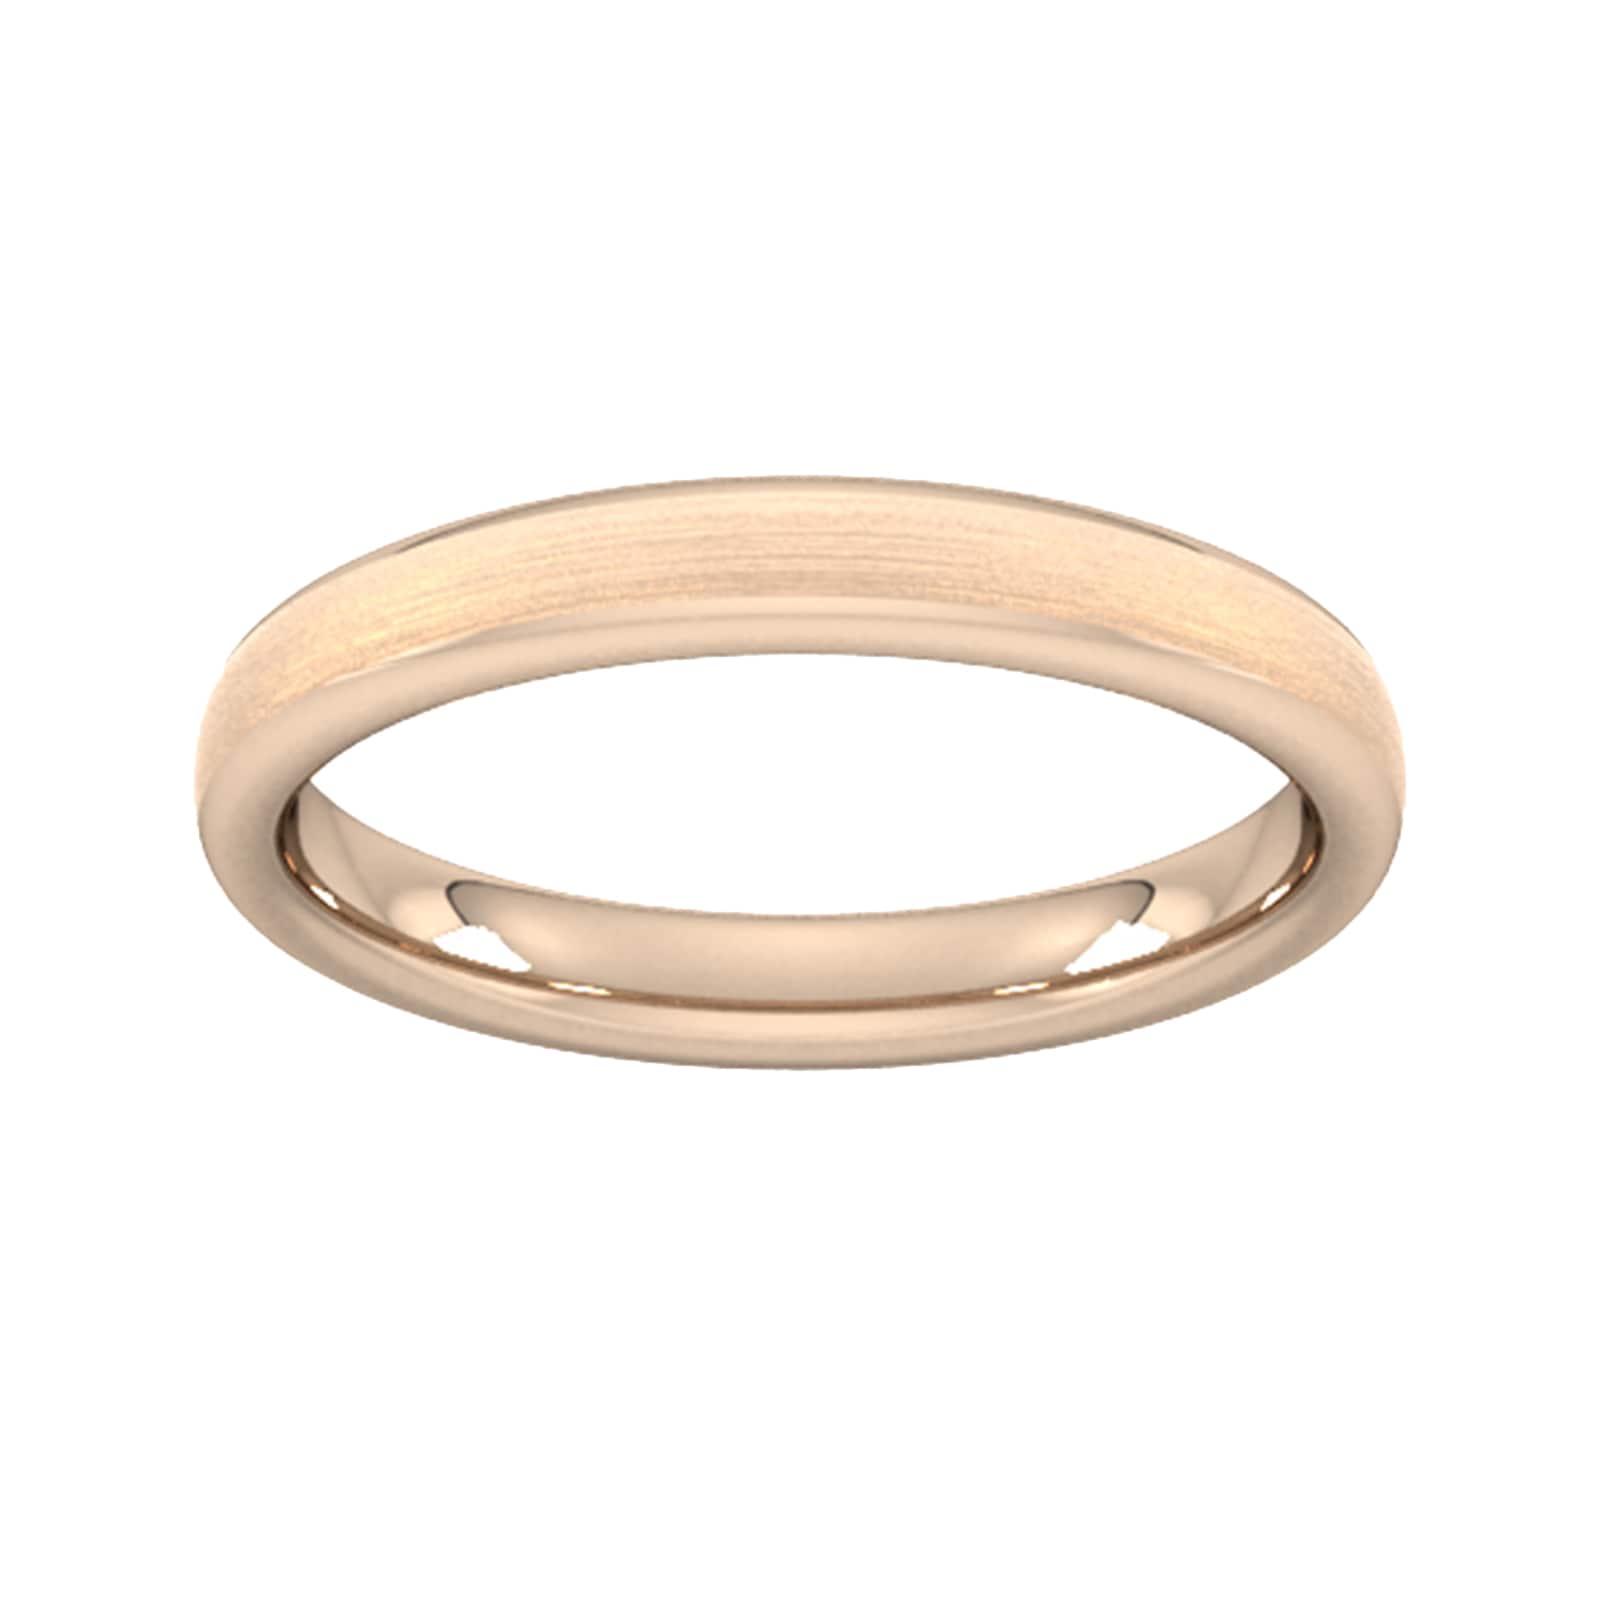 3mm D Shape Heavy Matt Finished Wedding Ring In 18 Carat Rose Gold - Ring Size T